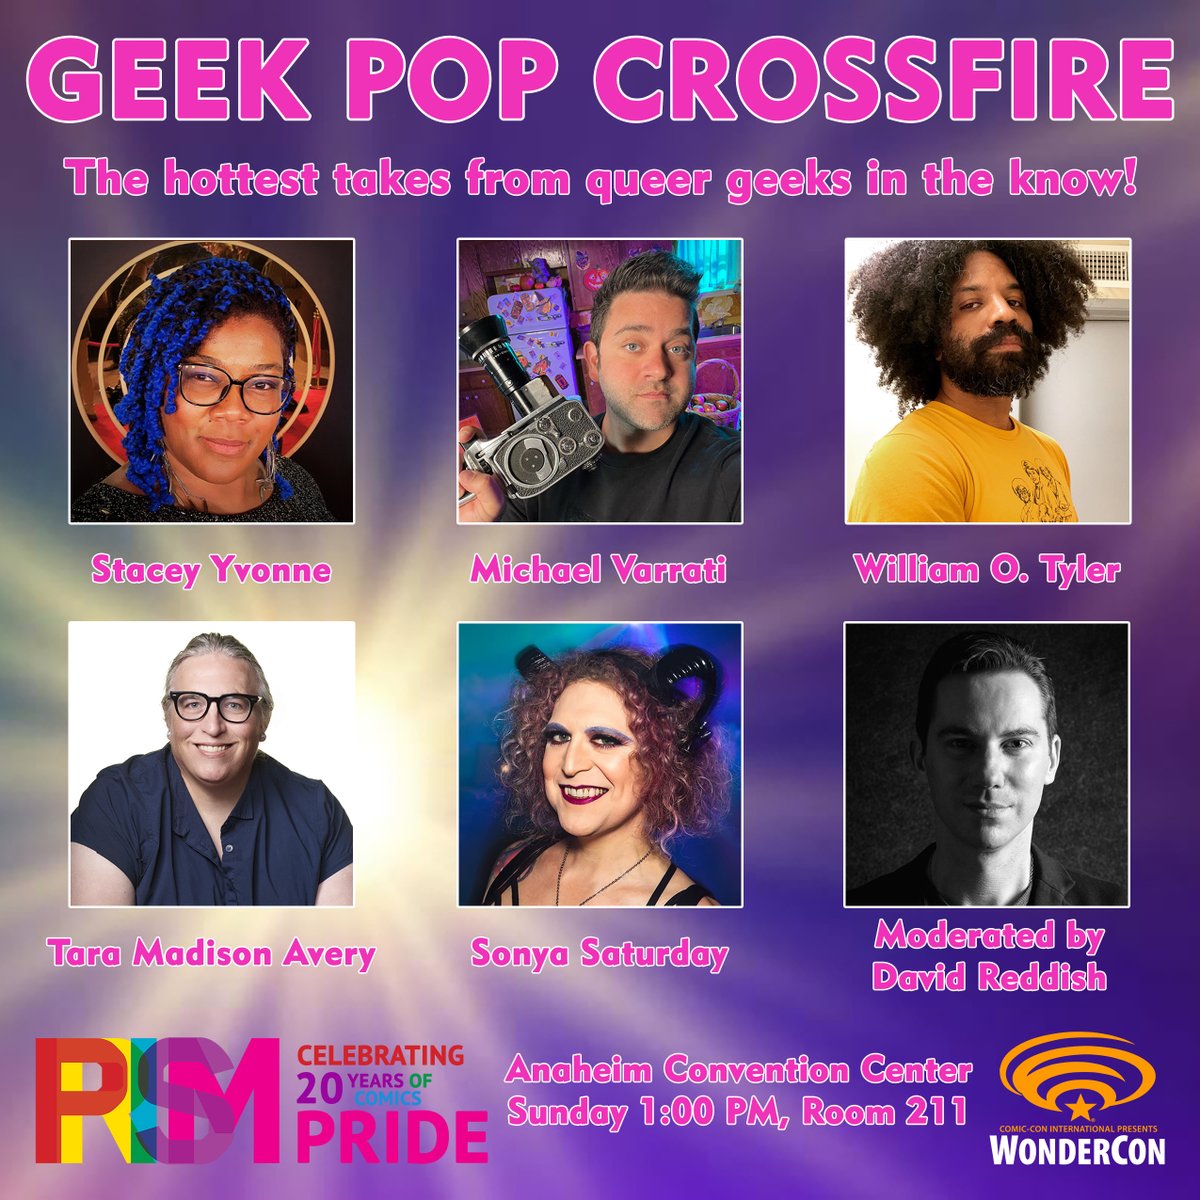 Join @PrismComics at @WonderCon for Geek Crossfire: Pop Culture Throw Down Sunday March 31st at 1:00 PM! See @StickyKeys, @MichaelVarrati, @WilliamOTyler, @TaraMAvery, Sonya Saturday, and moderator David Reddish give their hottest takes on today's coolest pop culture!